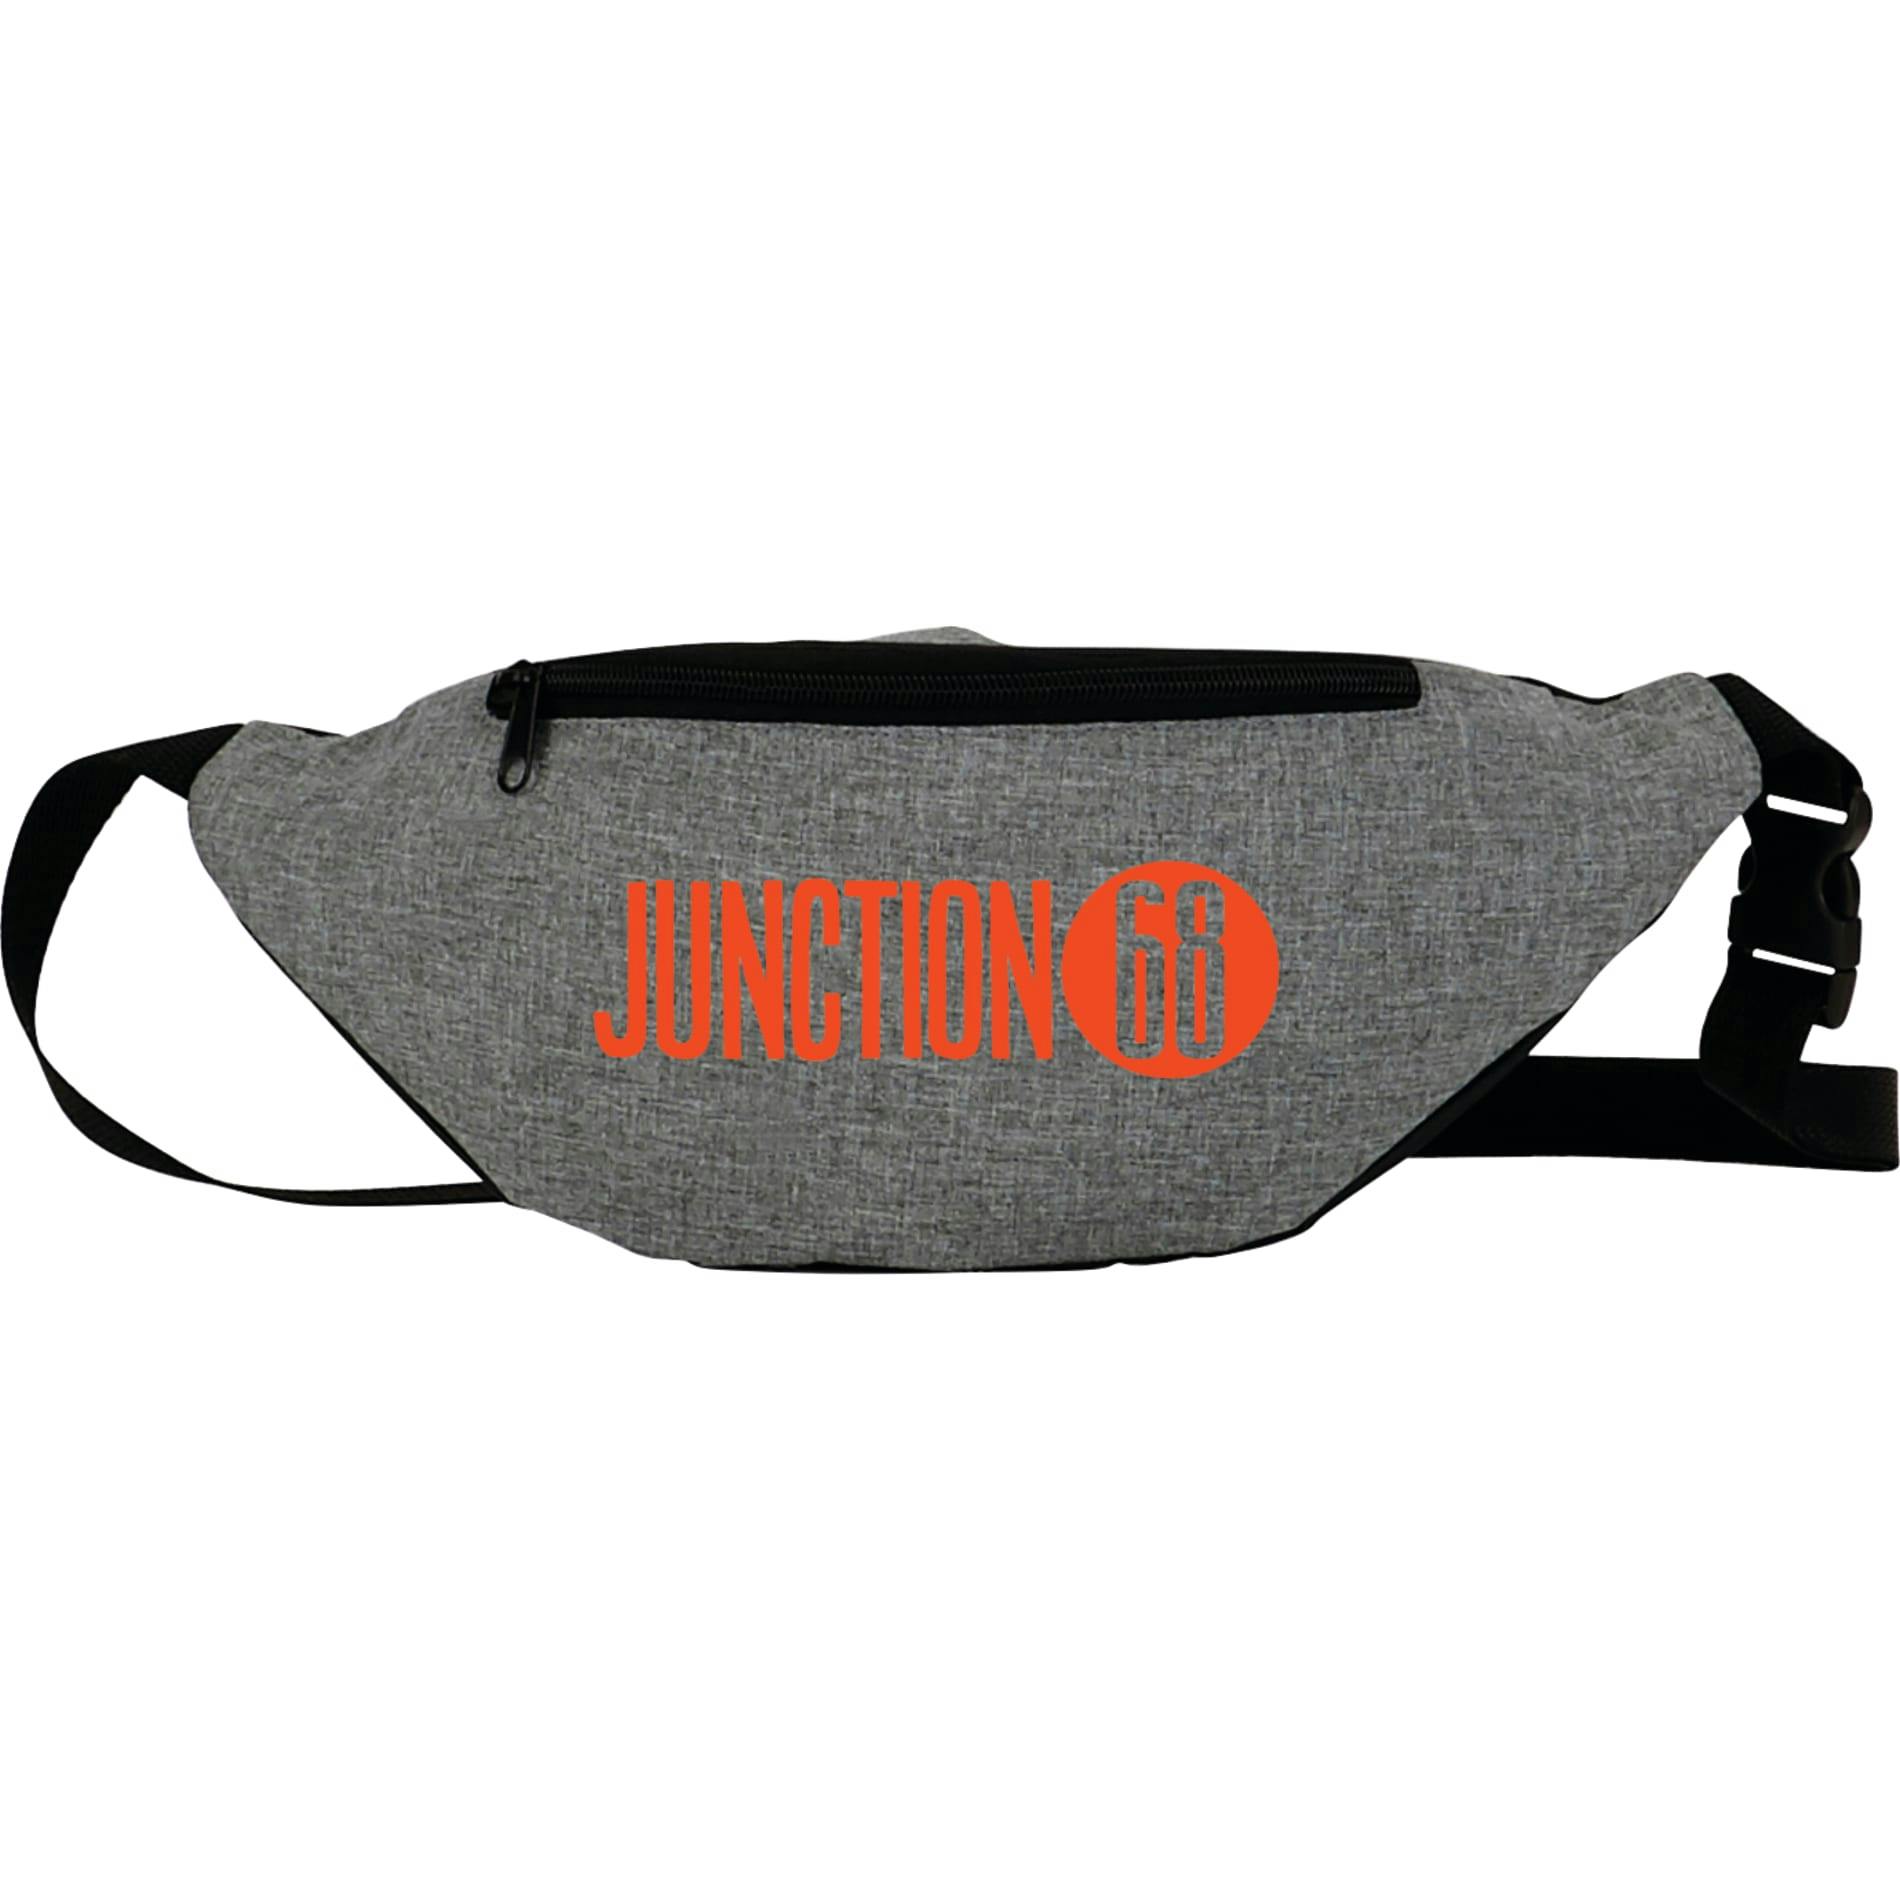 Hipster Budget Fanny Pack - additional Image 1